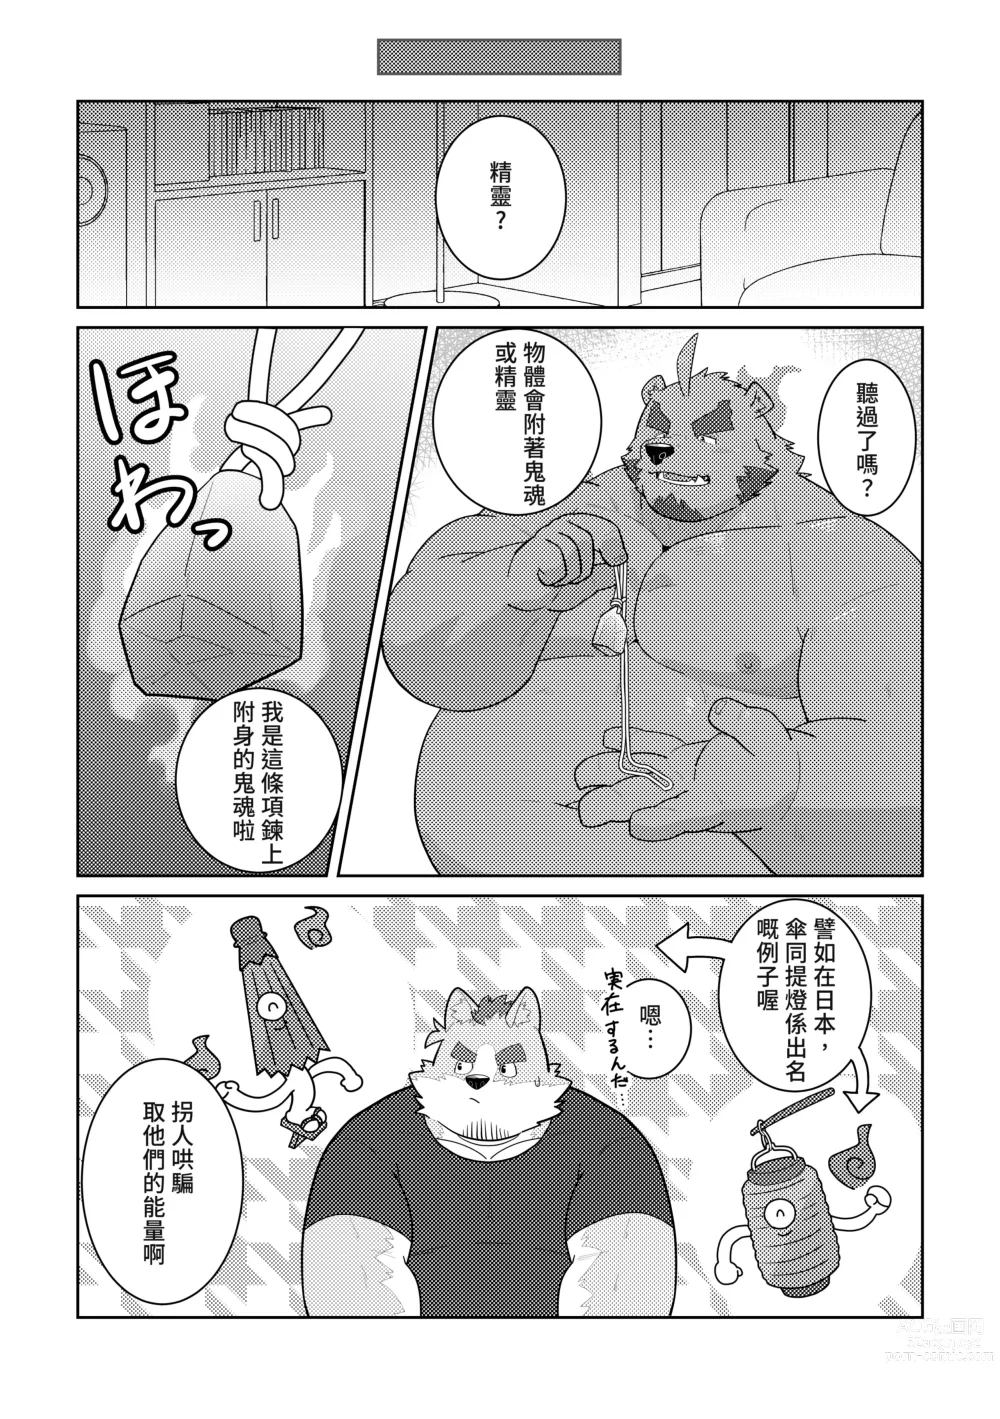 Page 8 of doujinshi 幽靈戀人